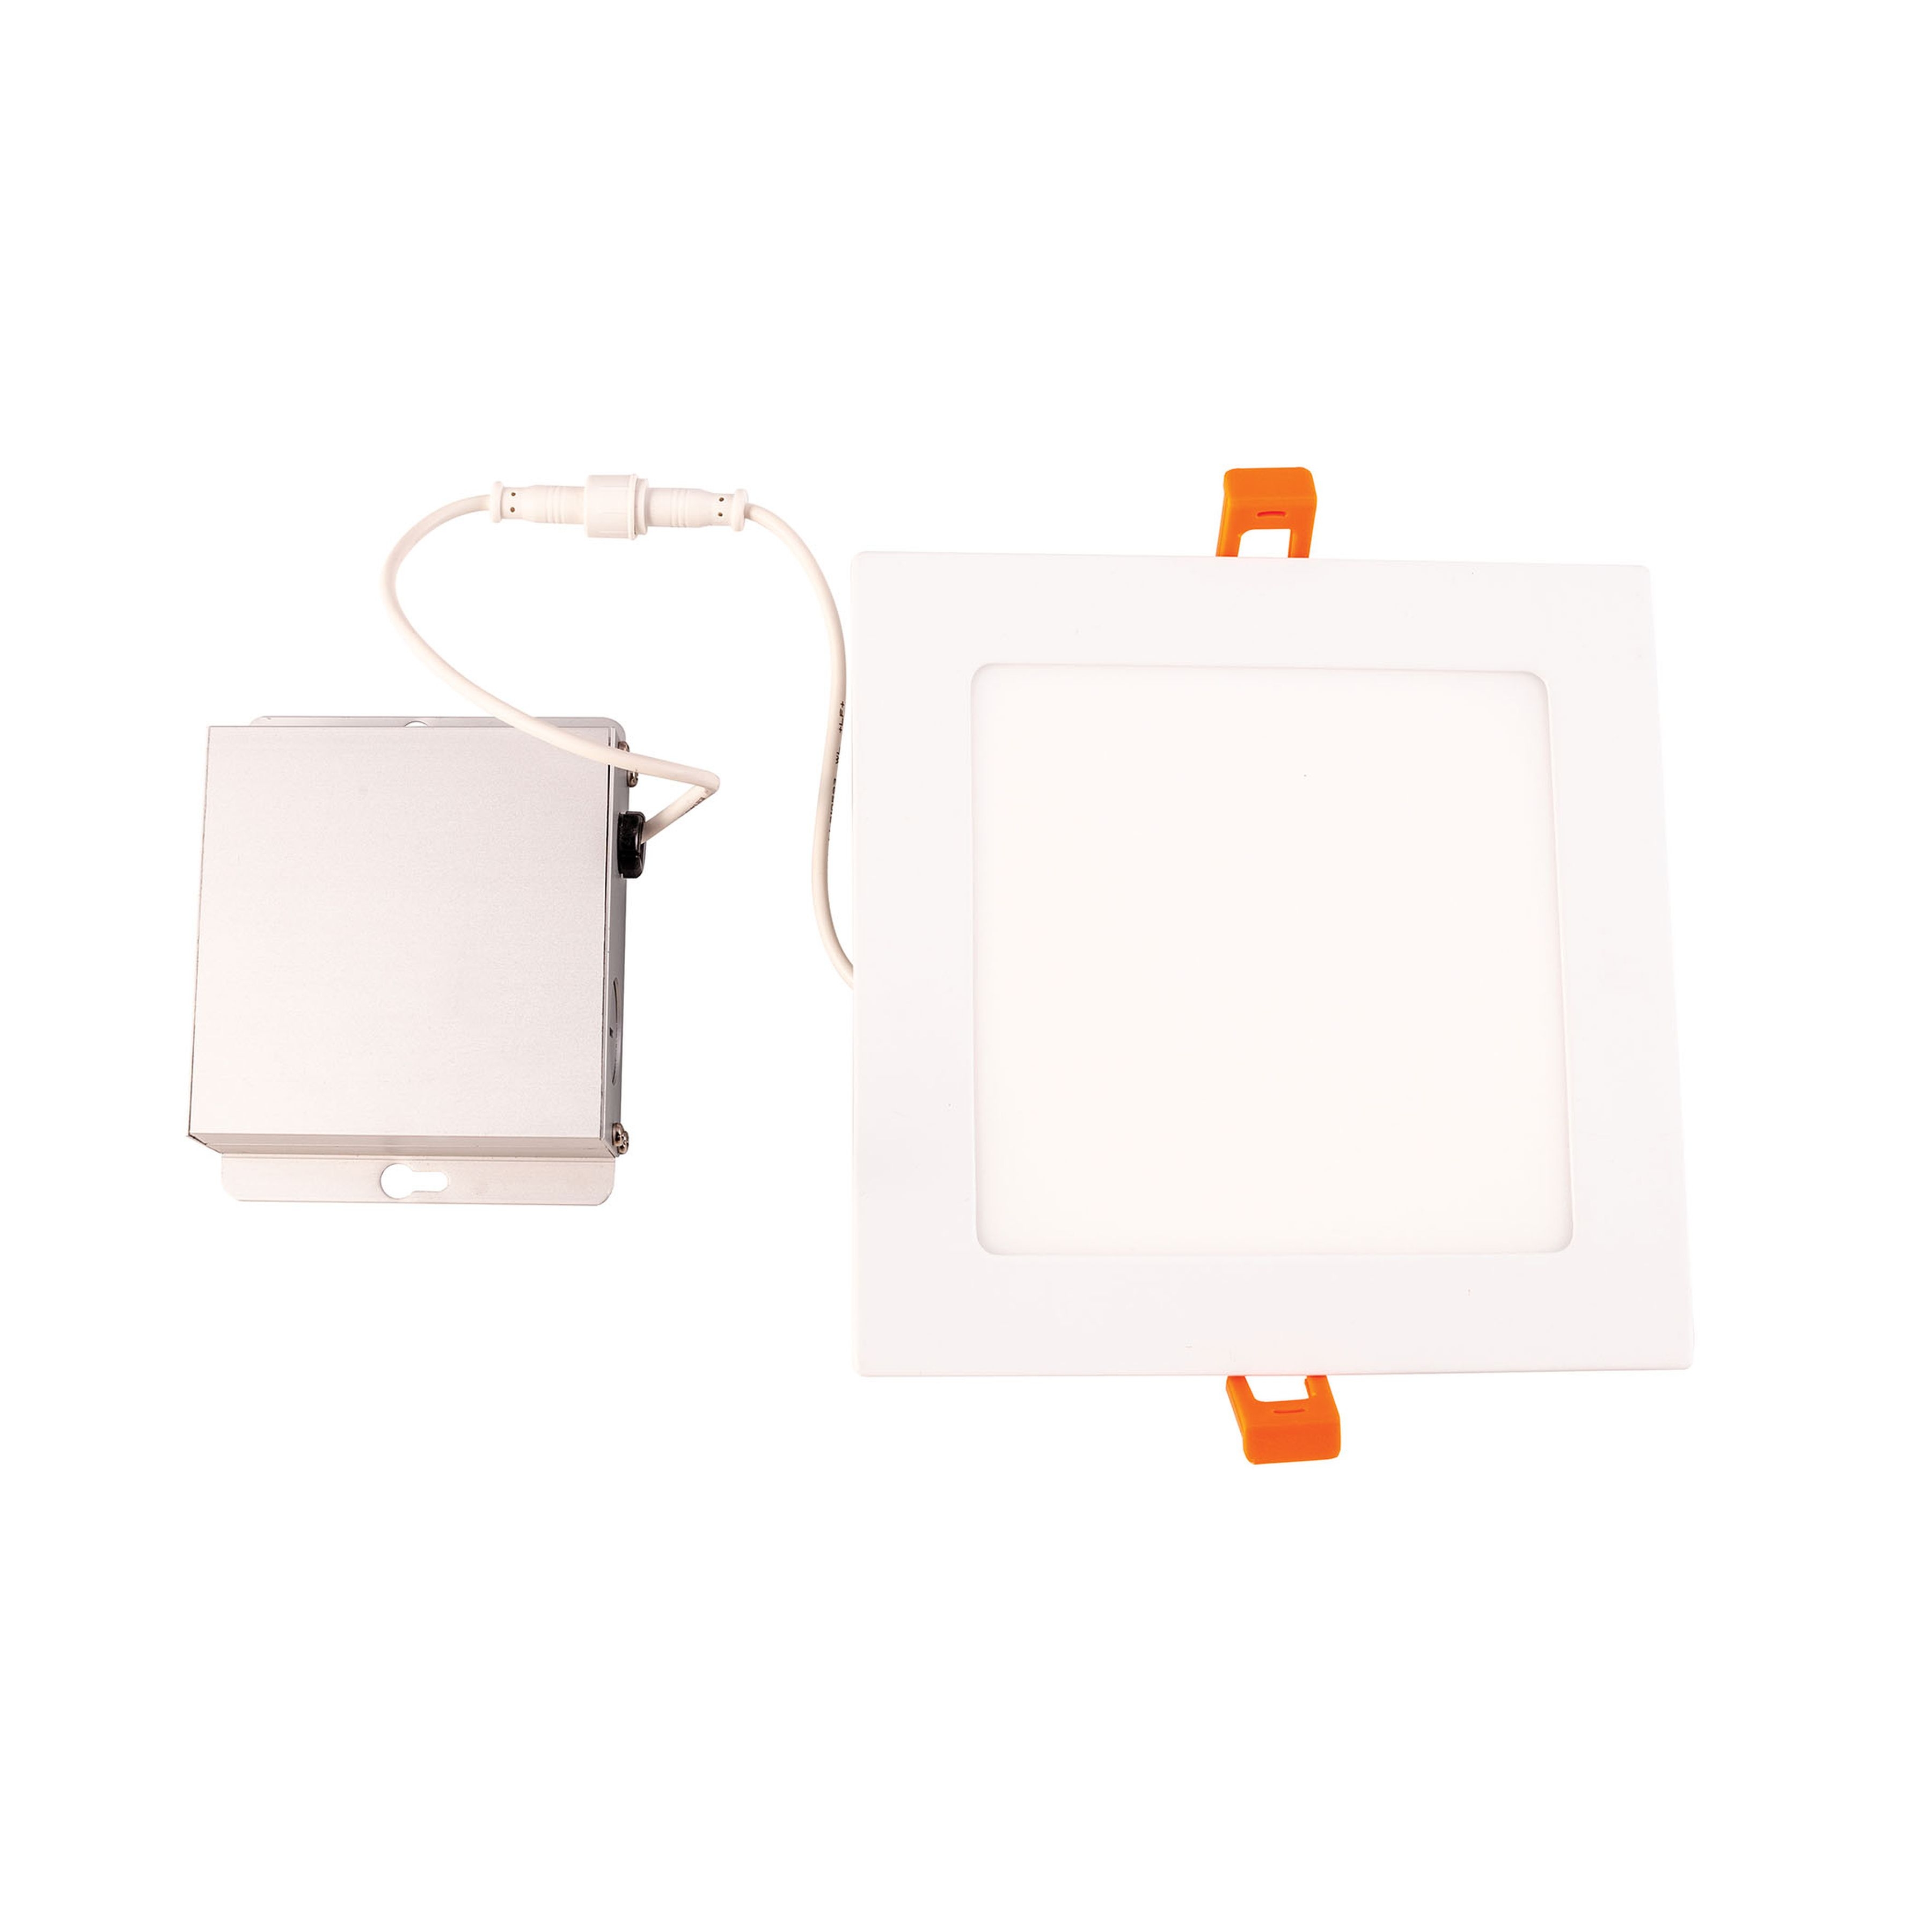 Mercury 6-inch Square Recessed Light in White - Integrated LED - Image 2